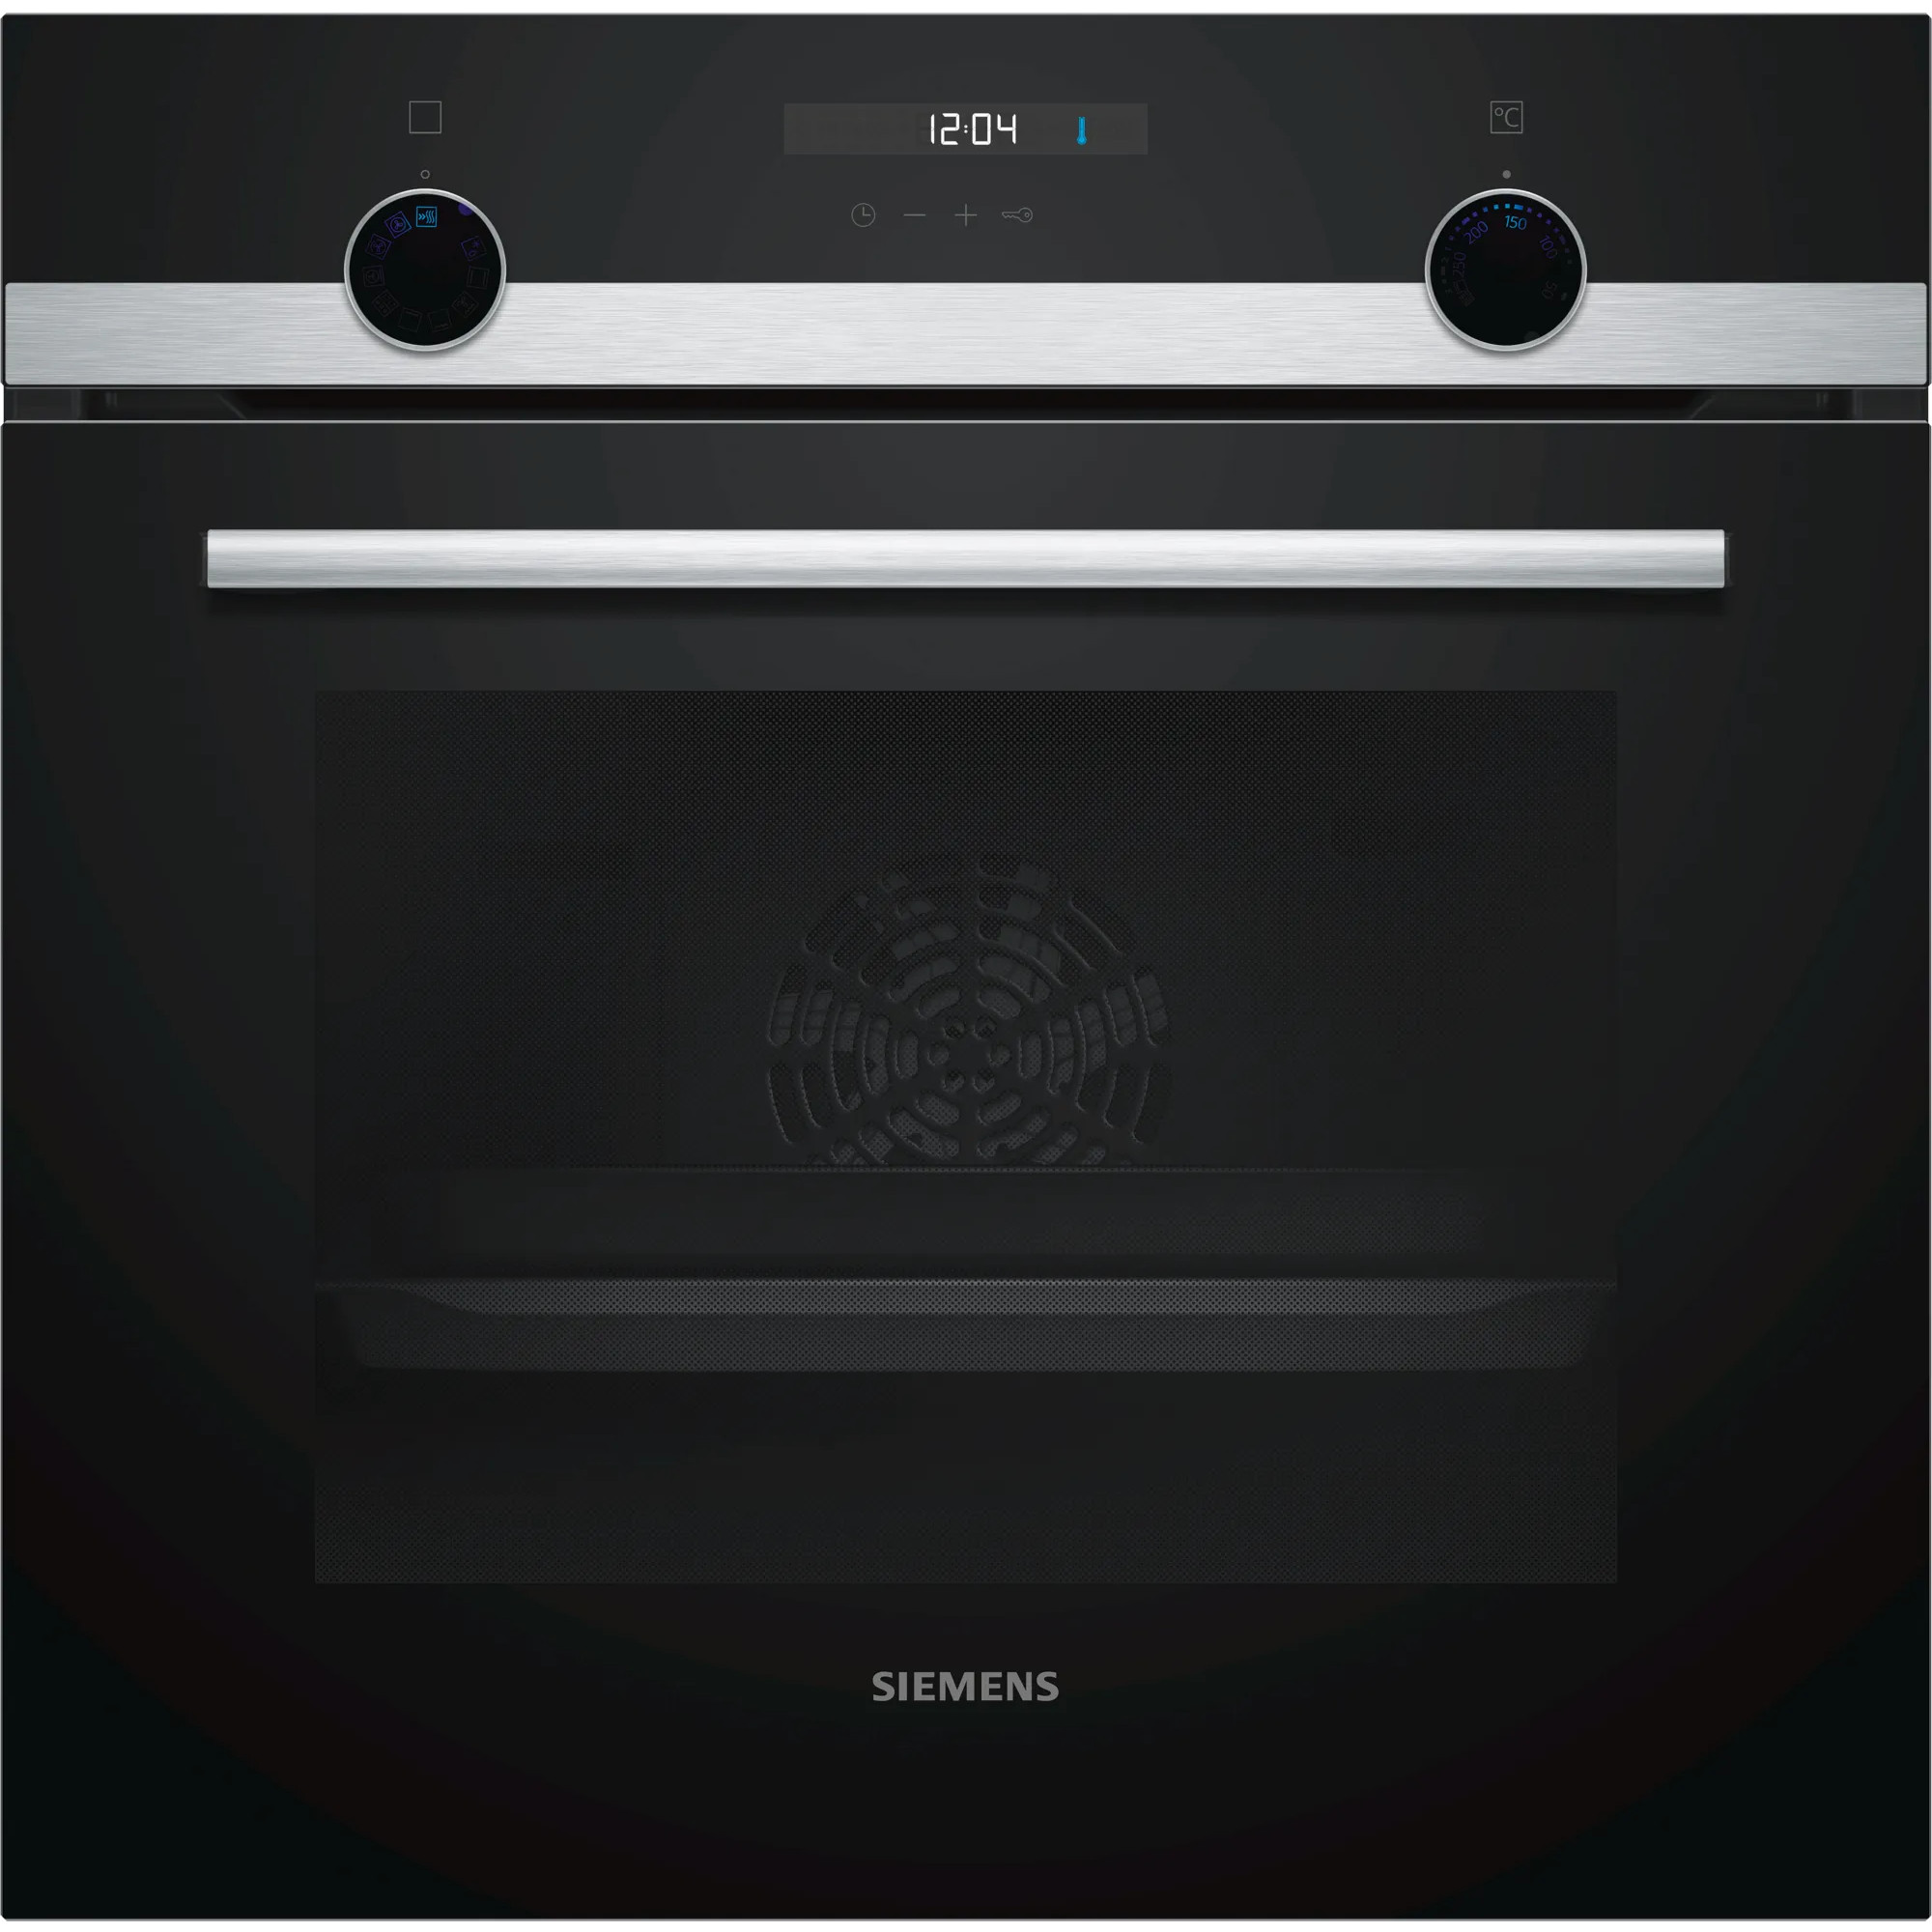 Bourgeon Jeugd Gevoelig Siemens Built In Oven with Automatic Start 60cm Stainless Steel – Shop Home  Appliances, Kitchen Sinks, Kitchen Mixers, Tiles and Countertop in Dubai  and UAE